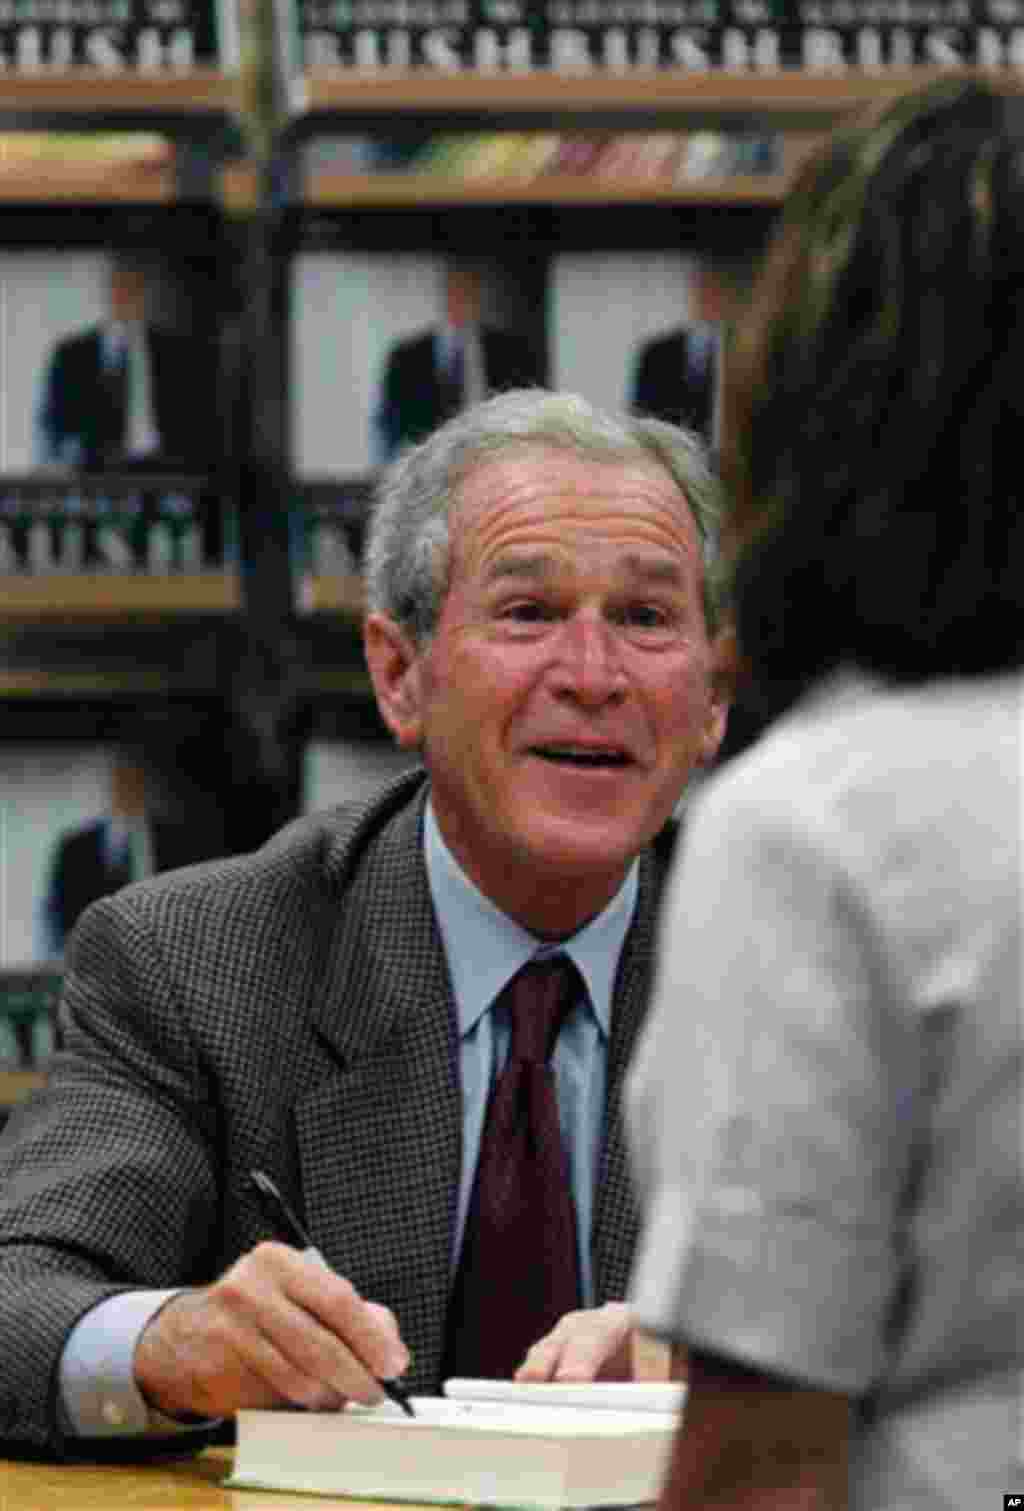 Former President George W. Bush signs a copy of his book "Decision Points" at a store near his Dallas home, Tuesday, Nov. 9, 2010. (AP Photo/LM Otero)